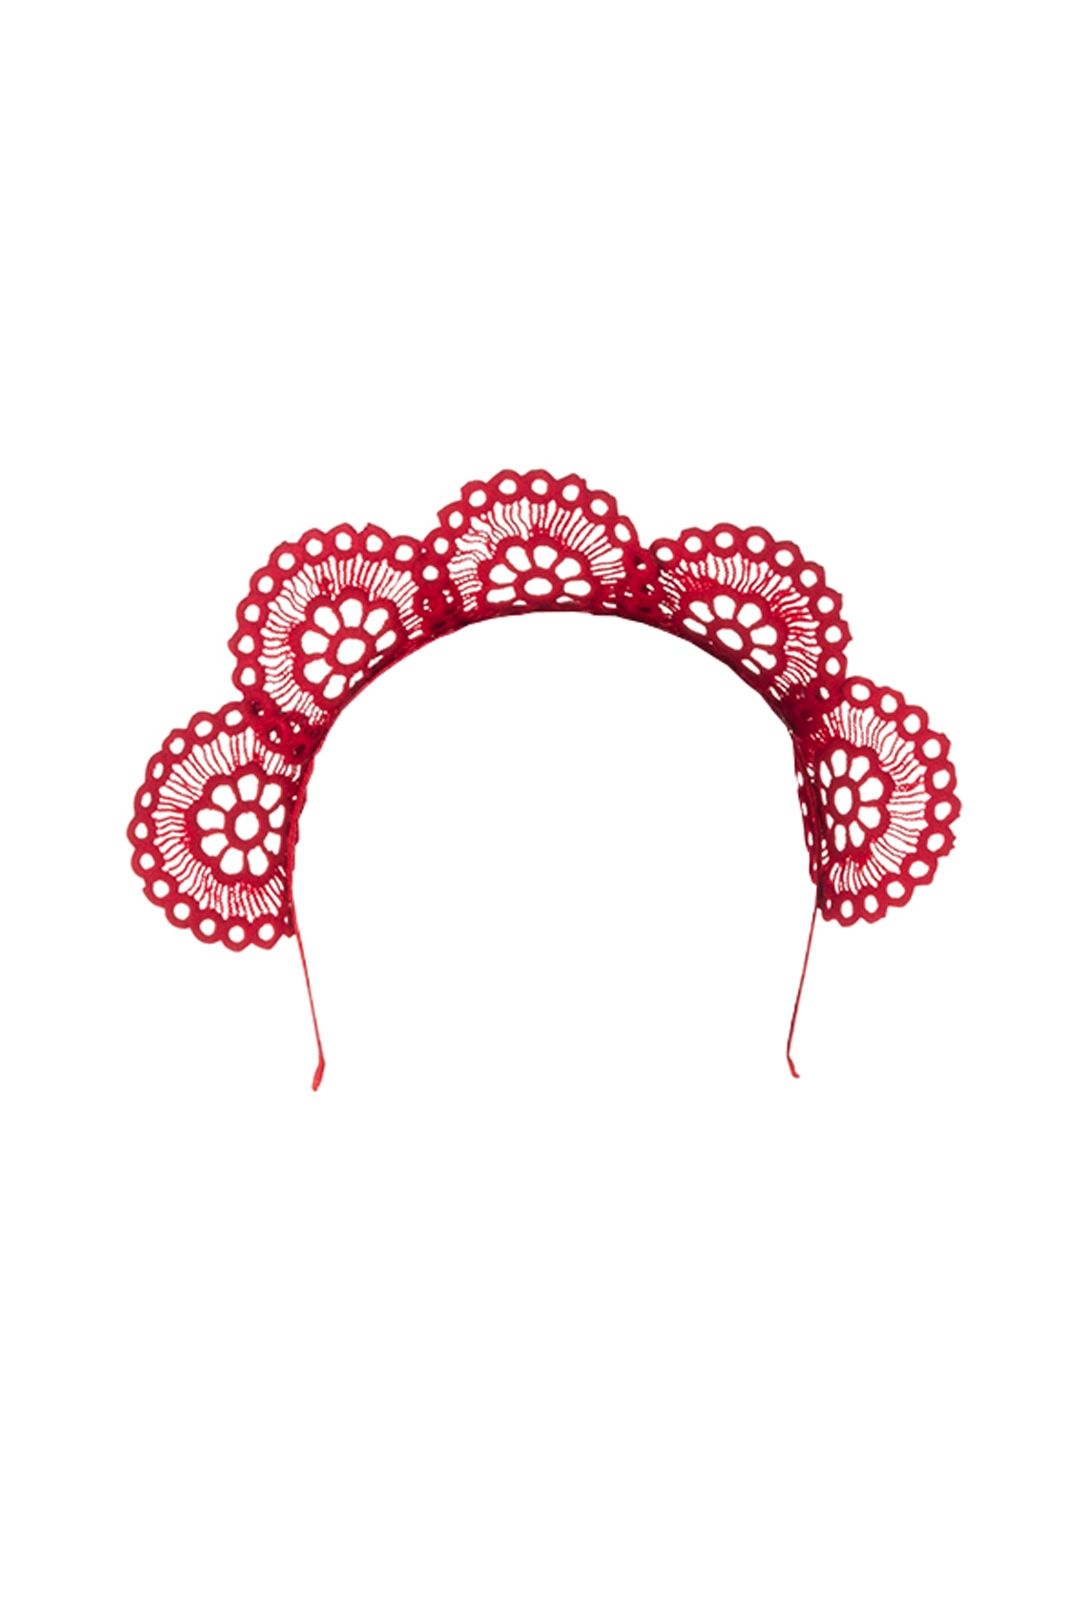 Olga Berg - Claire Lace Headband - Red - Front